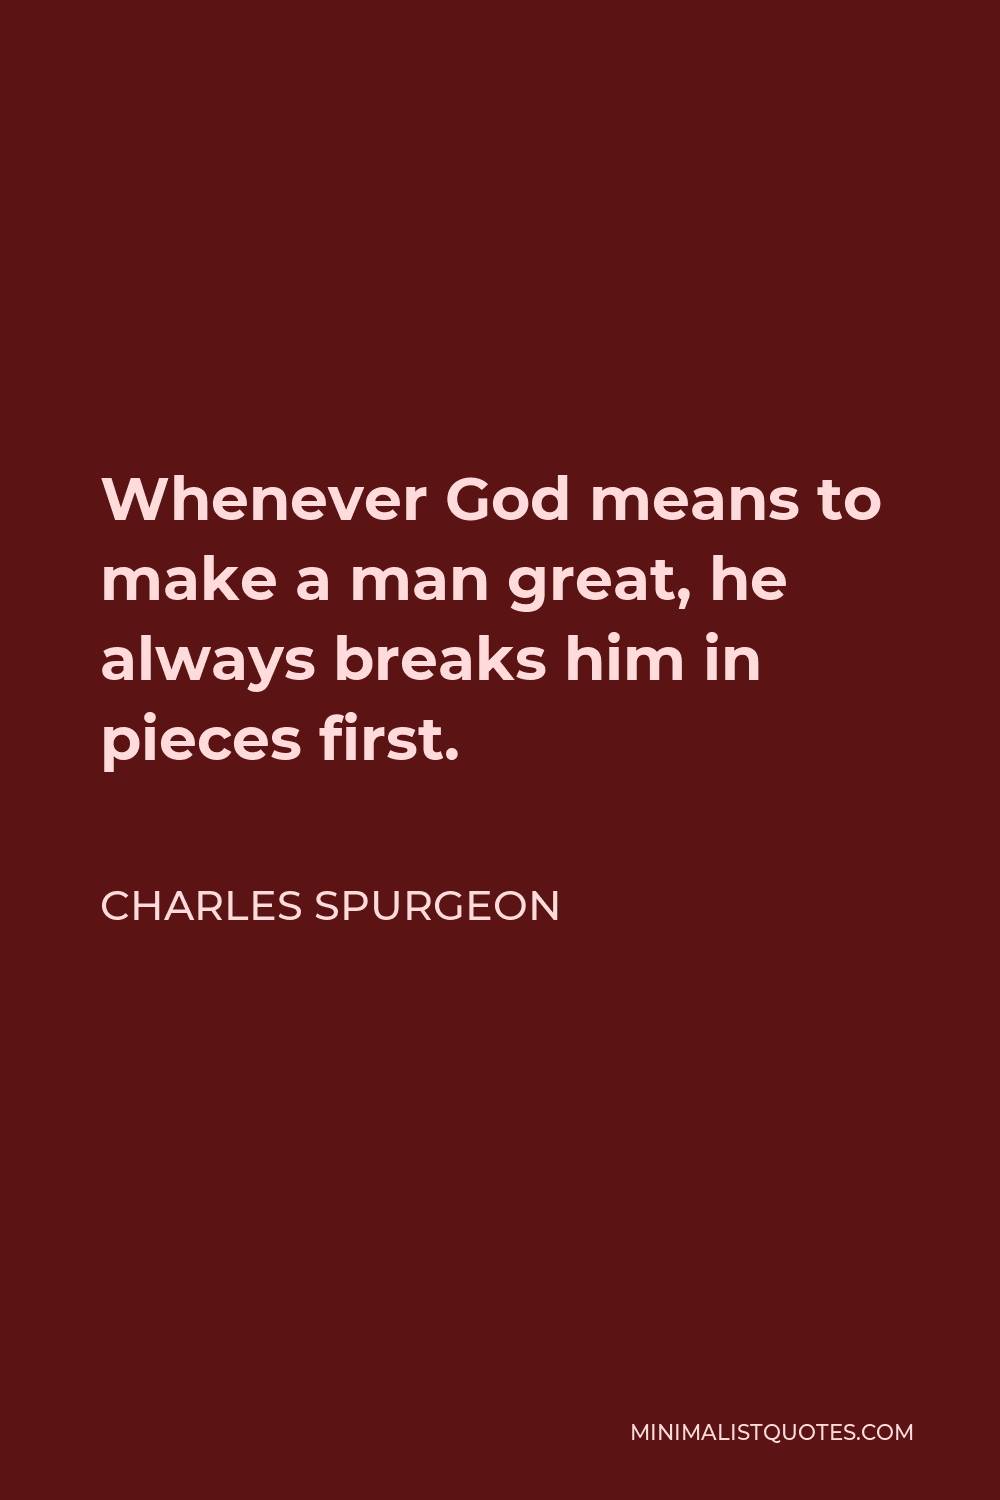 Charles Spurgeon Quote - Whenever God means to make a man great, he always breaks him in pieces first.